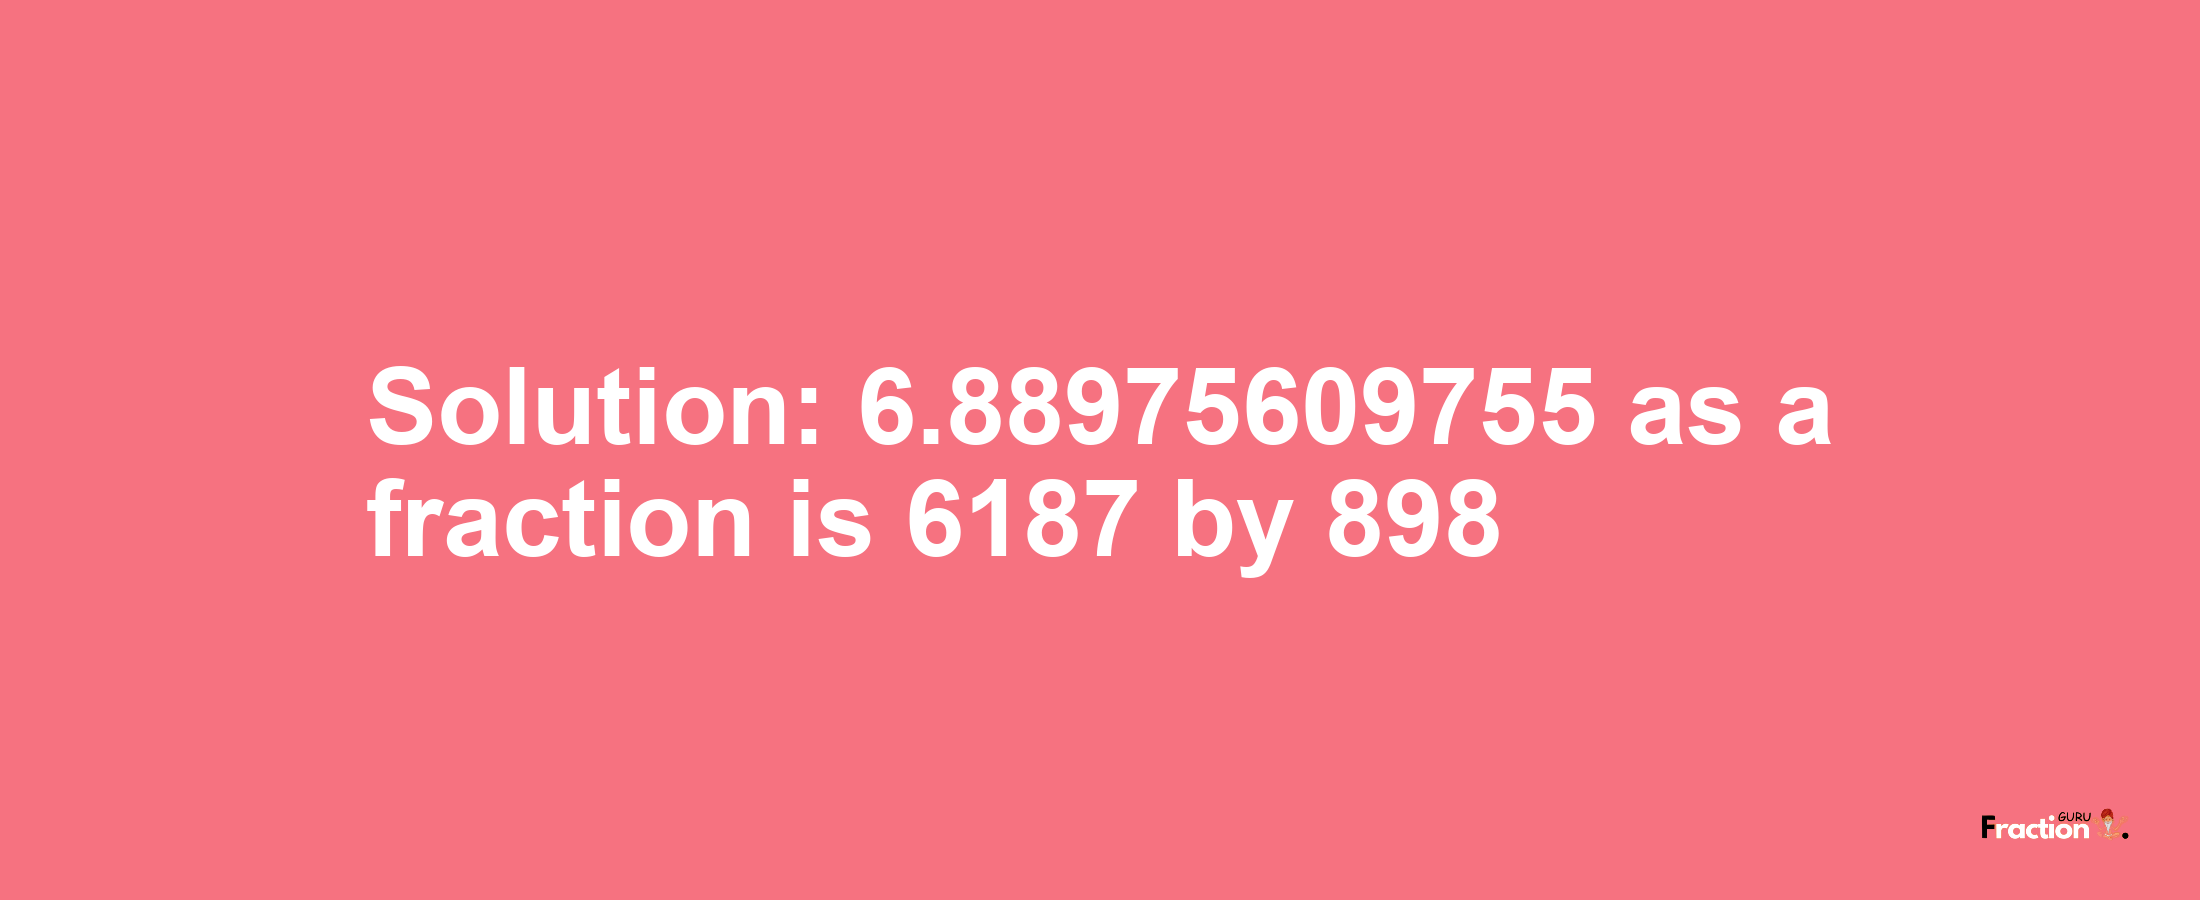 Solution:6.88975609755 as a fraction is 6187/898